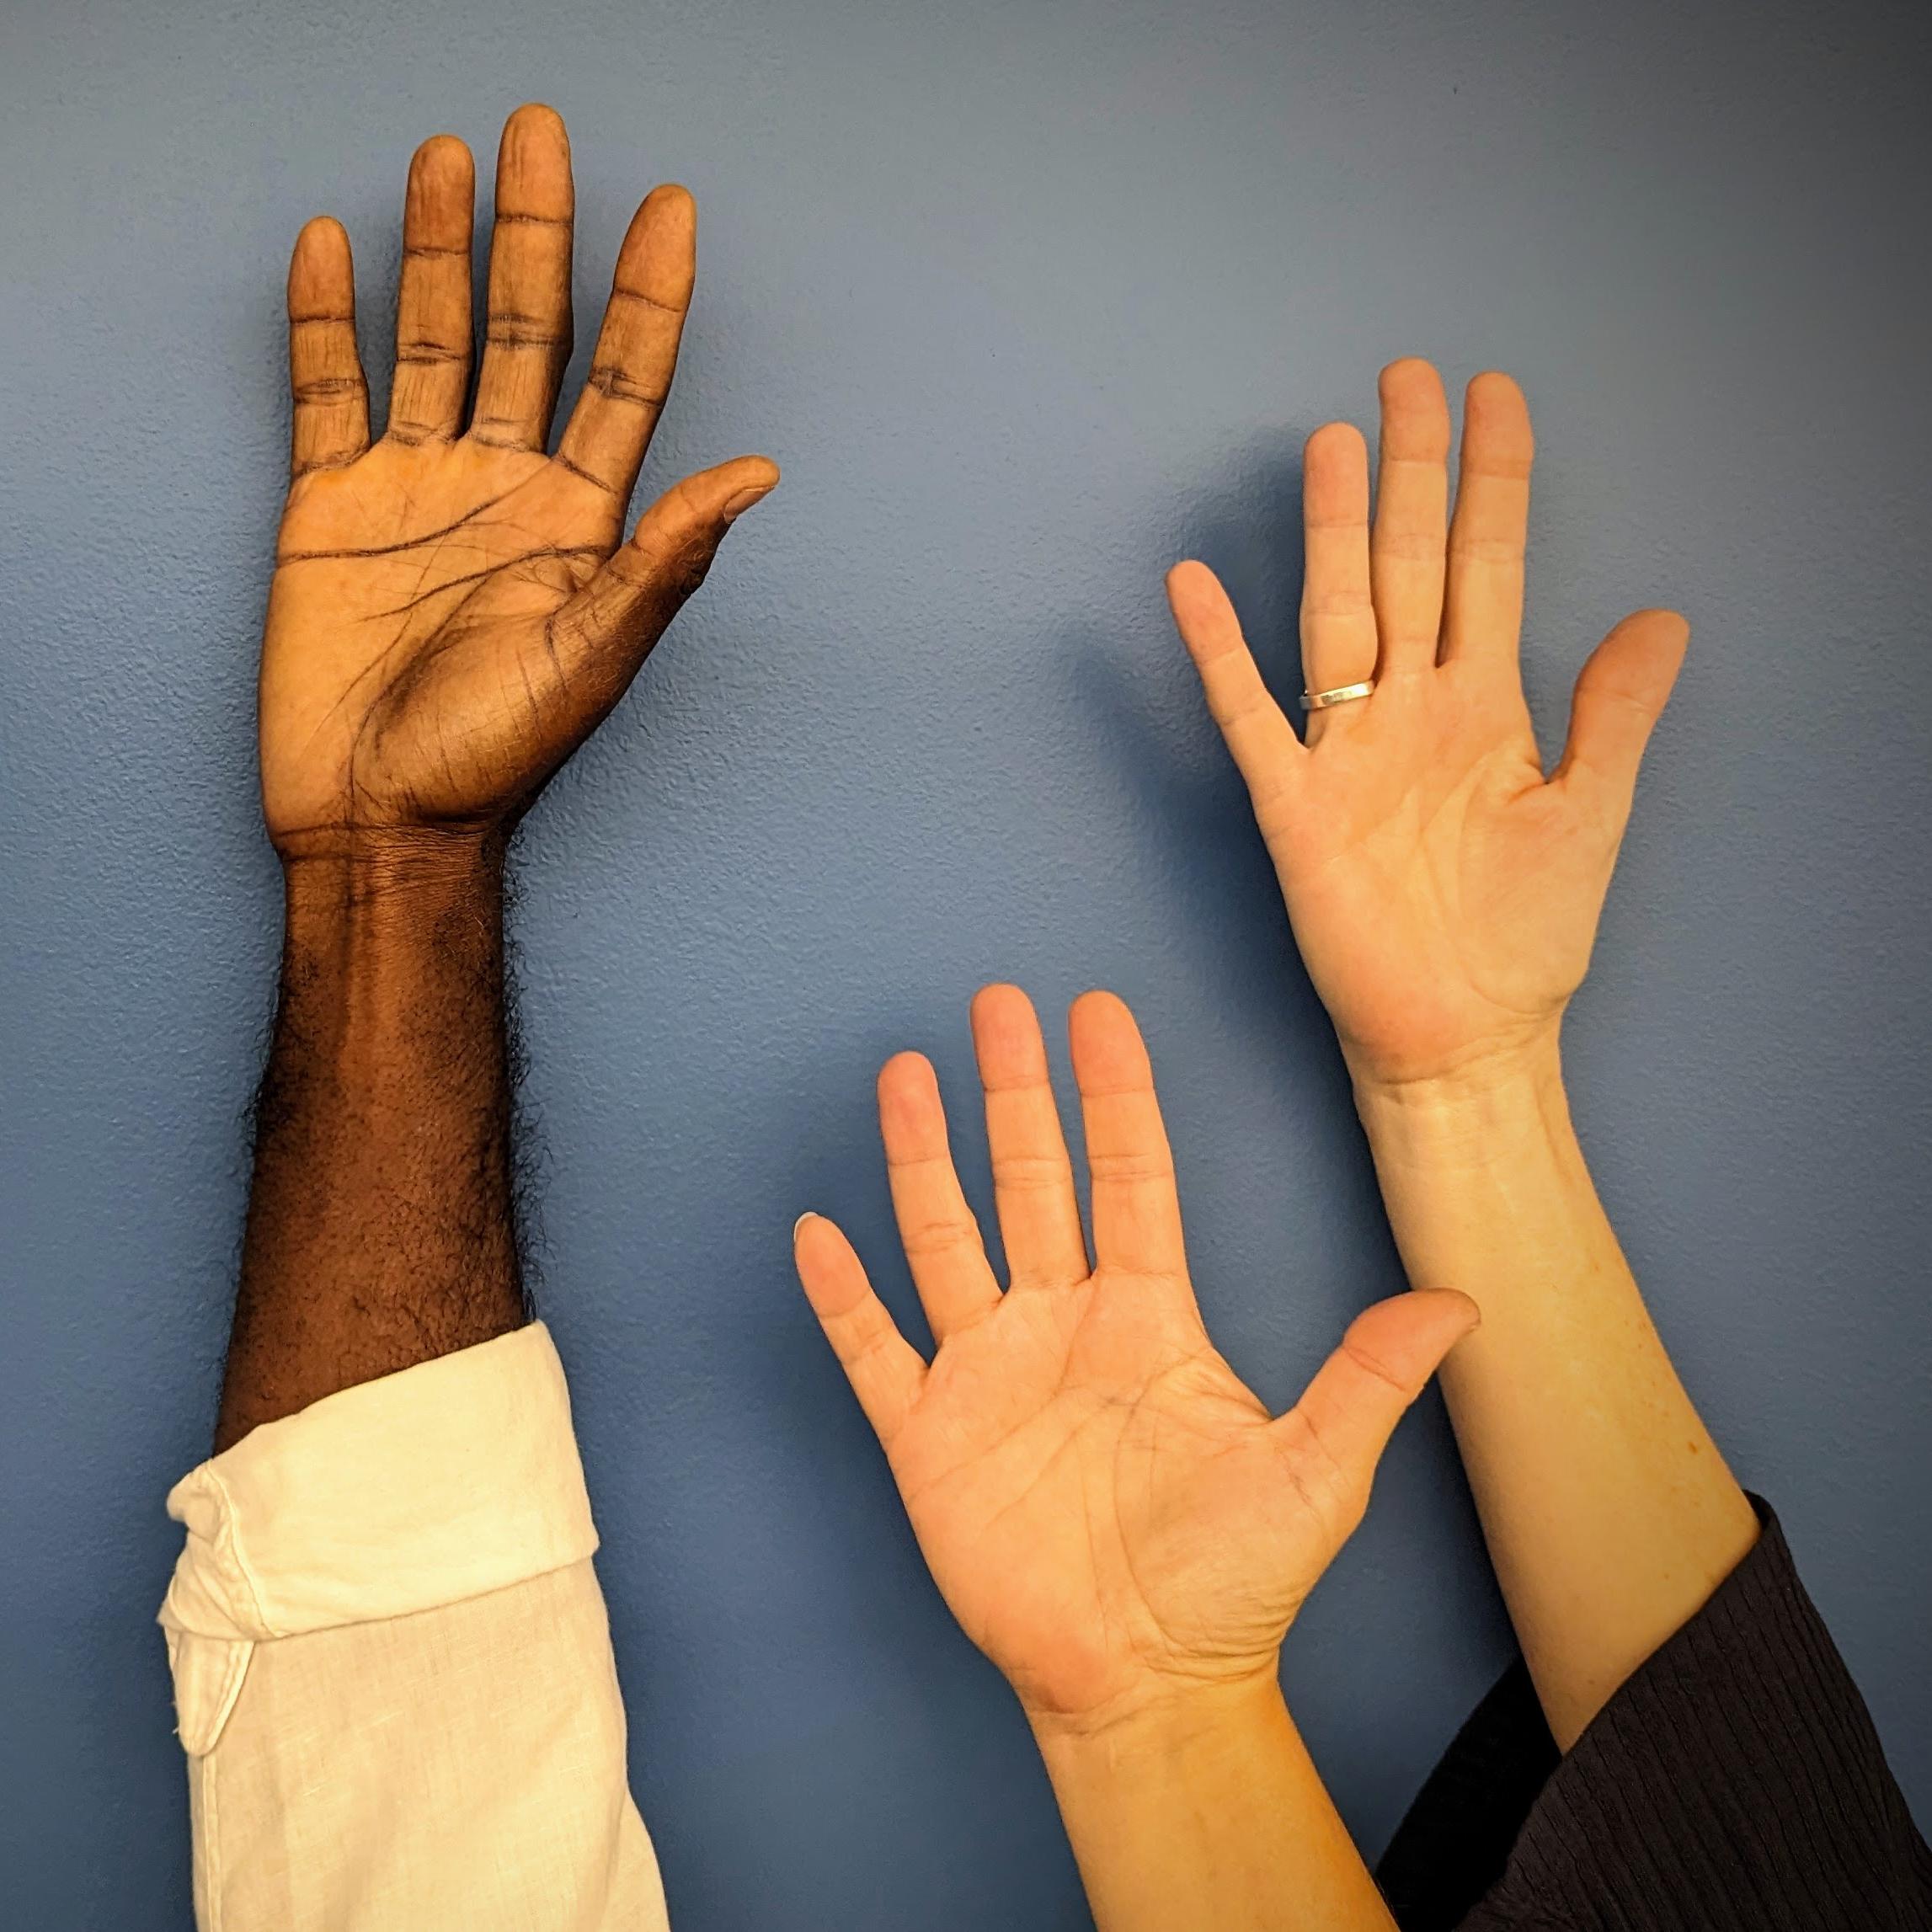 A photograph of four raised hands.